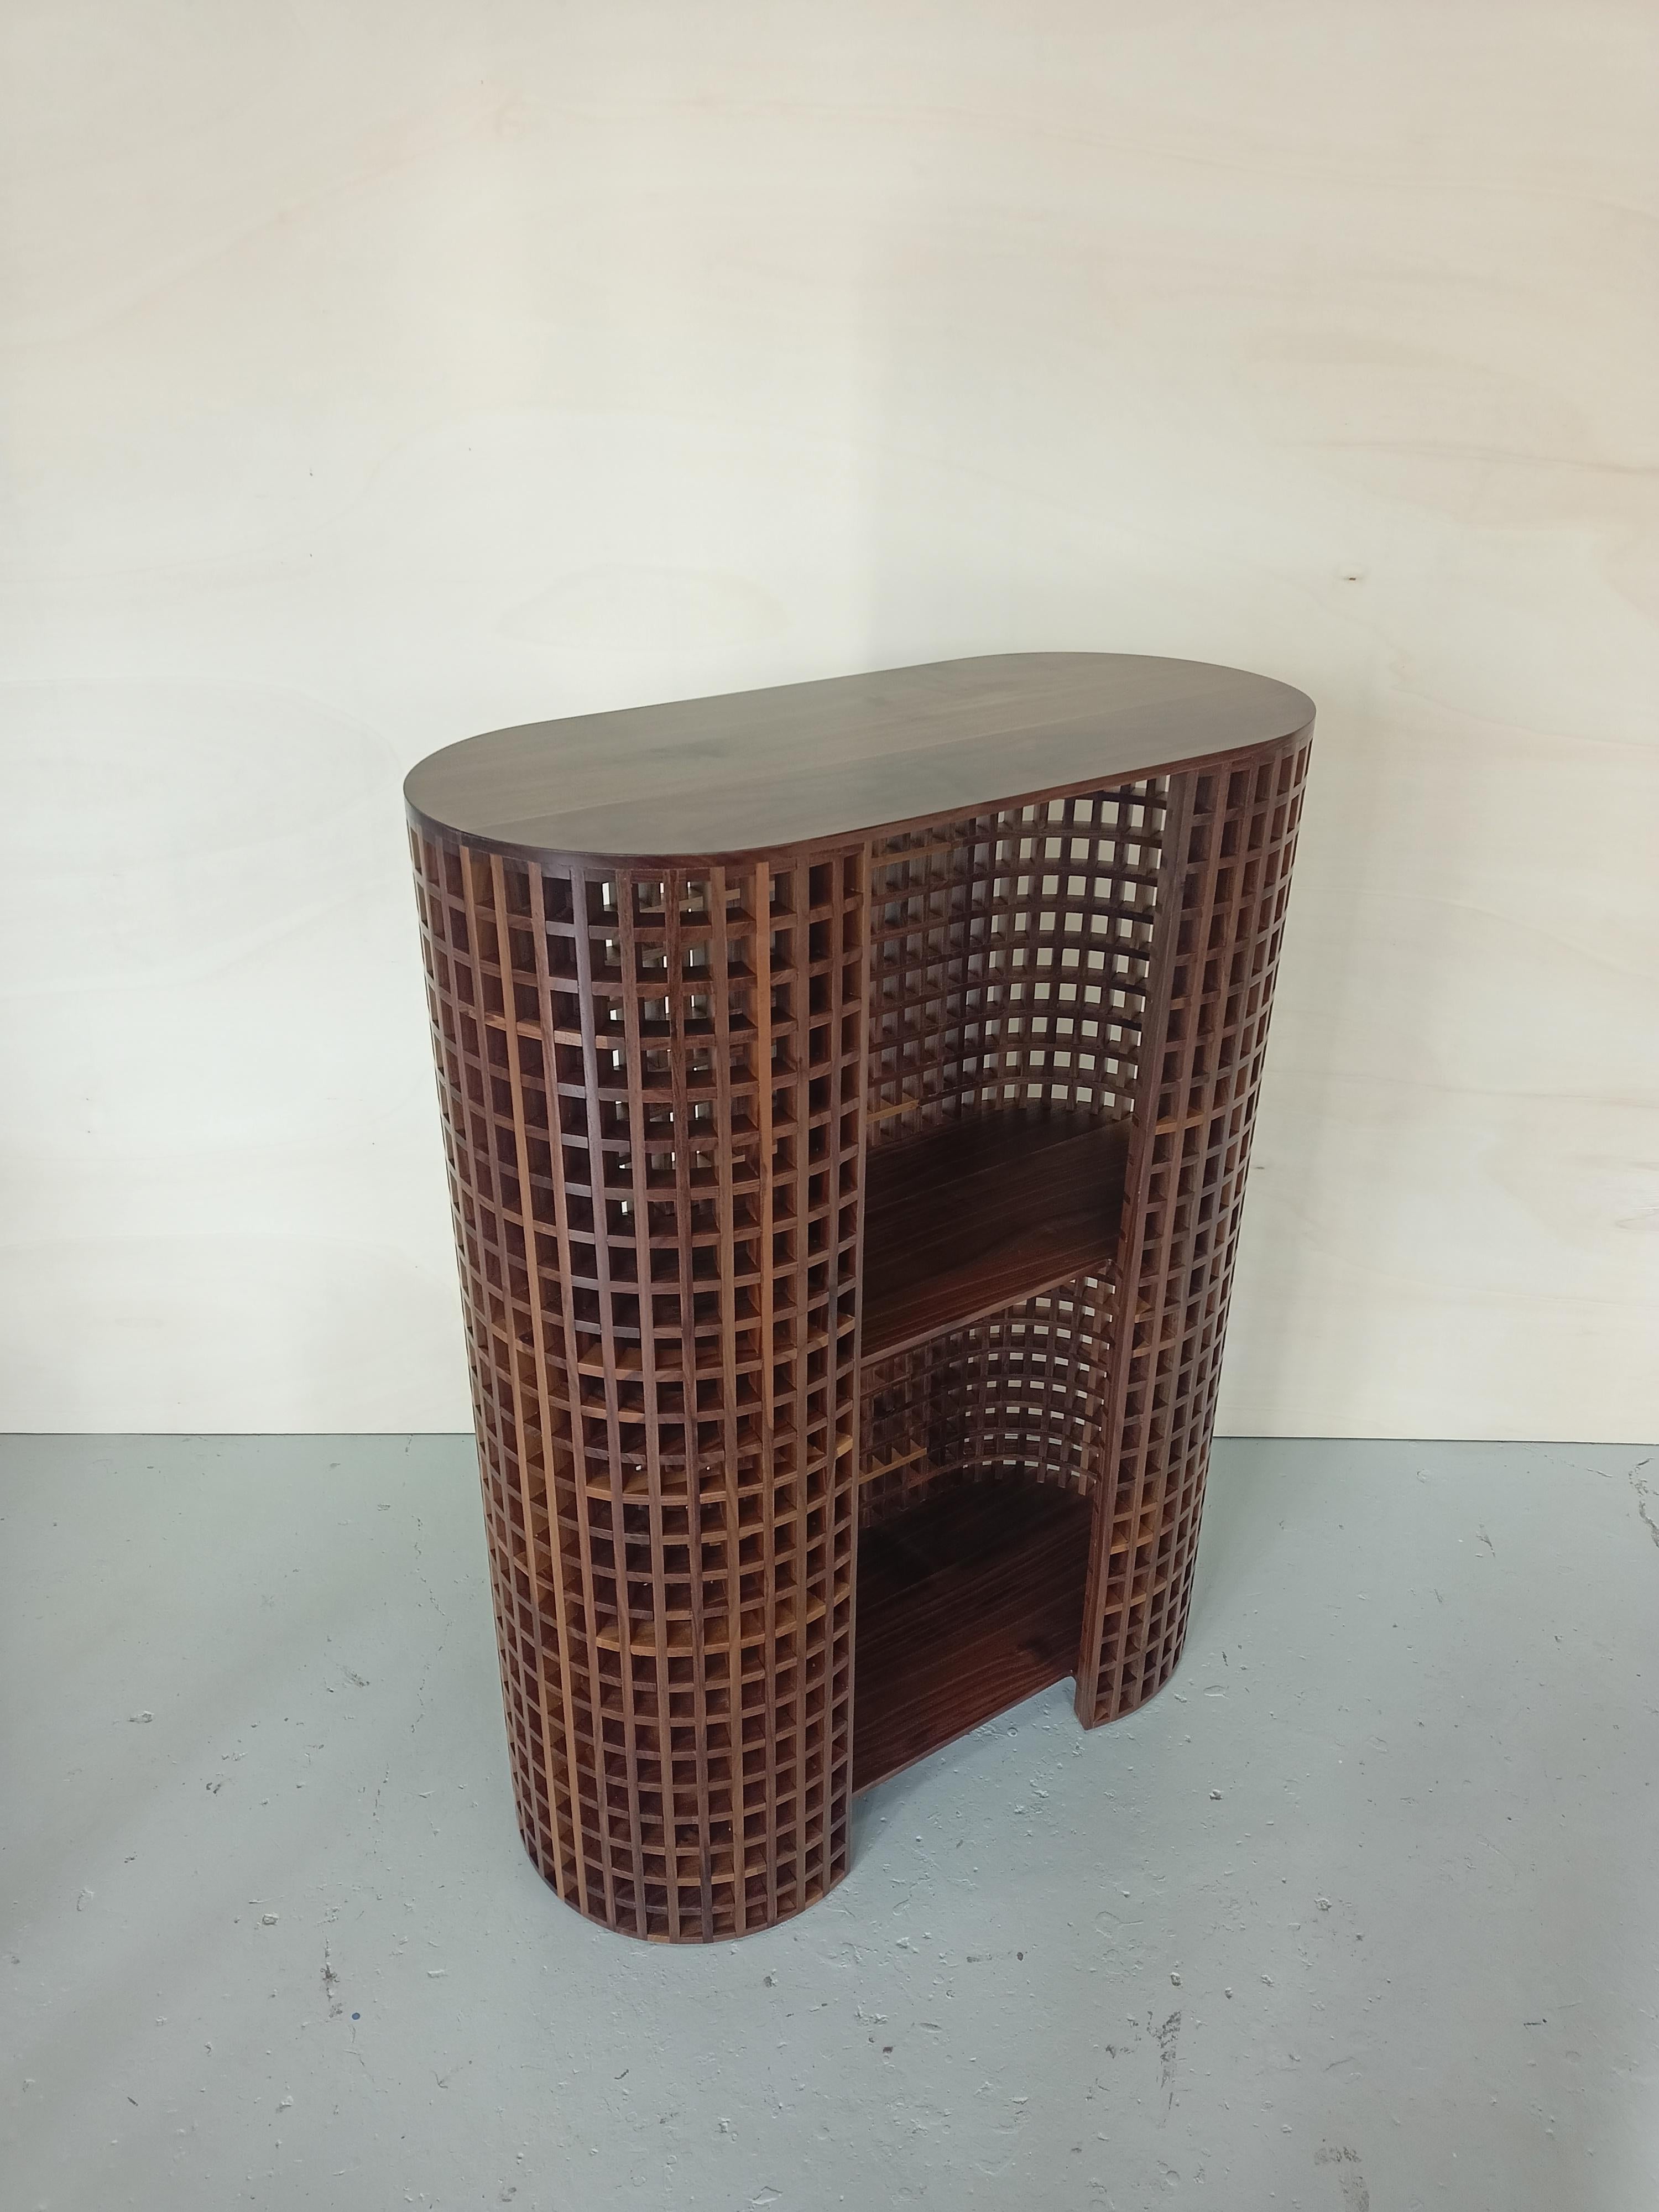 Carabottino is a contemporary and crafted cabinet, a wooden grating that is presented in a two-dimensional form traditionally made of wooden
strips, it is considered to be an accessory element of relative
importance, similar to windows and door